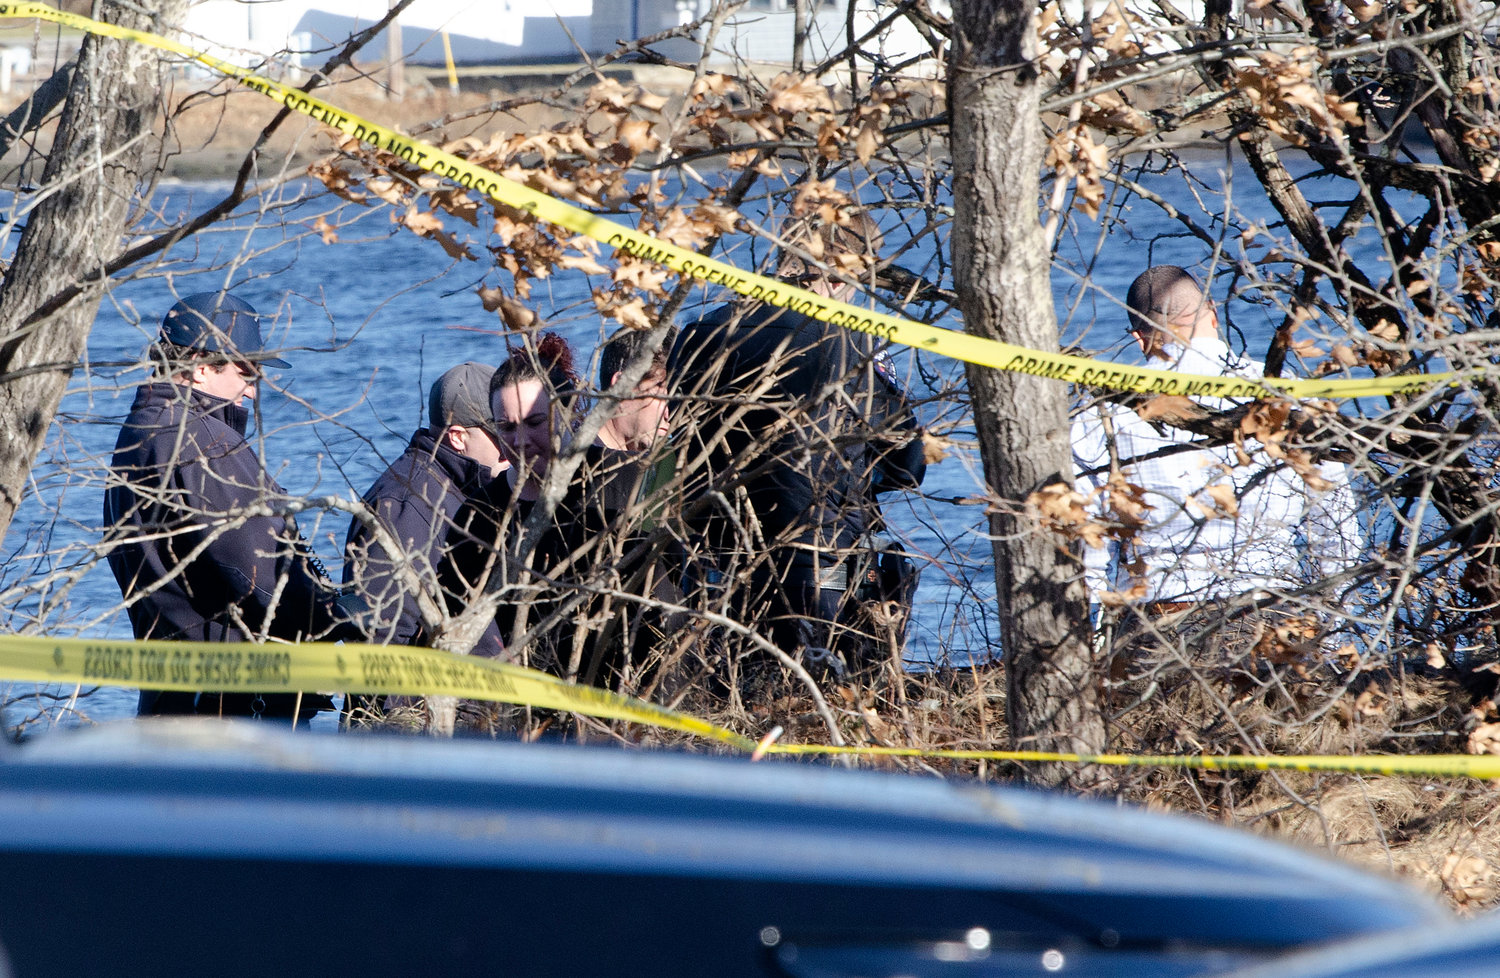 Barrington Police, firemen and medical examiners look over the scene where a body was discovered on Wednesday afternoon.